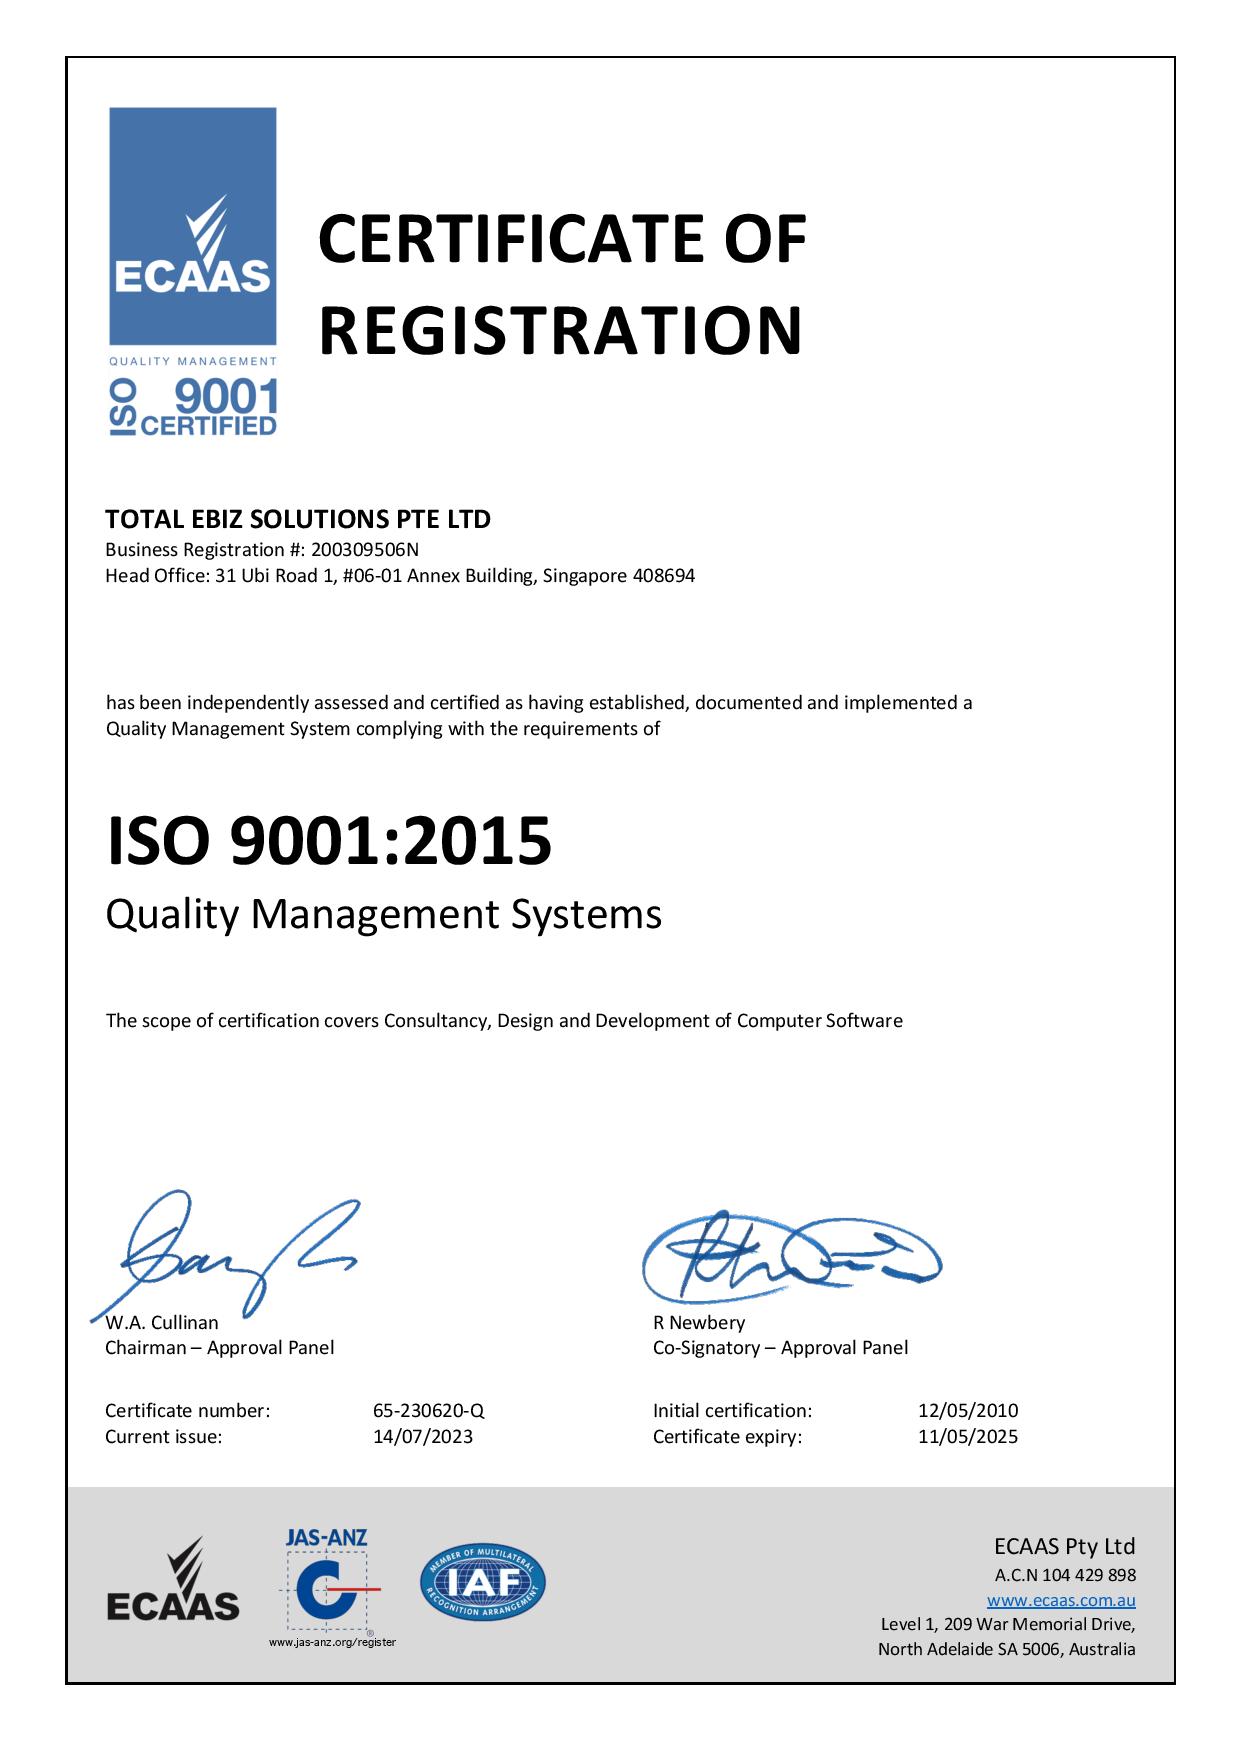 Total eBiz solutions Achieves ISO 9001:2015 Certifications for (QMS) Quality Management System.